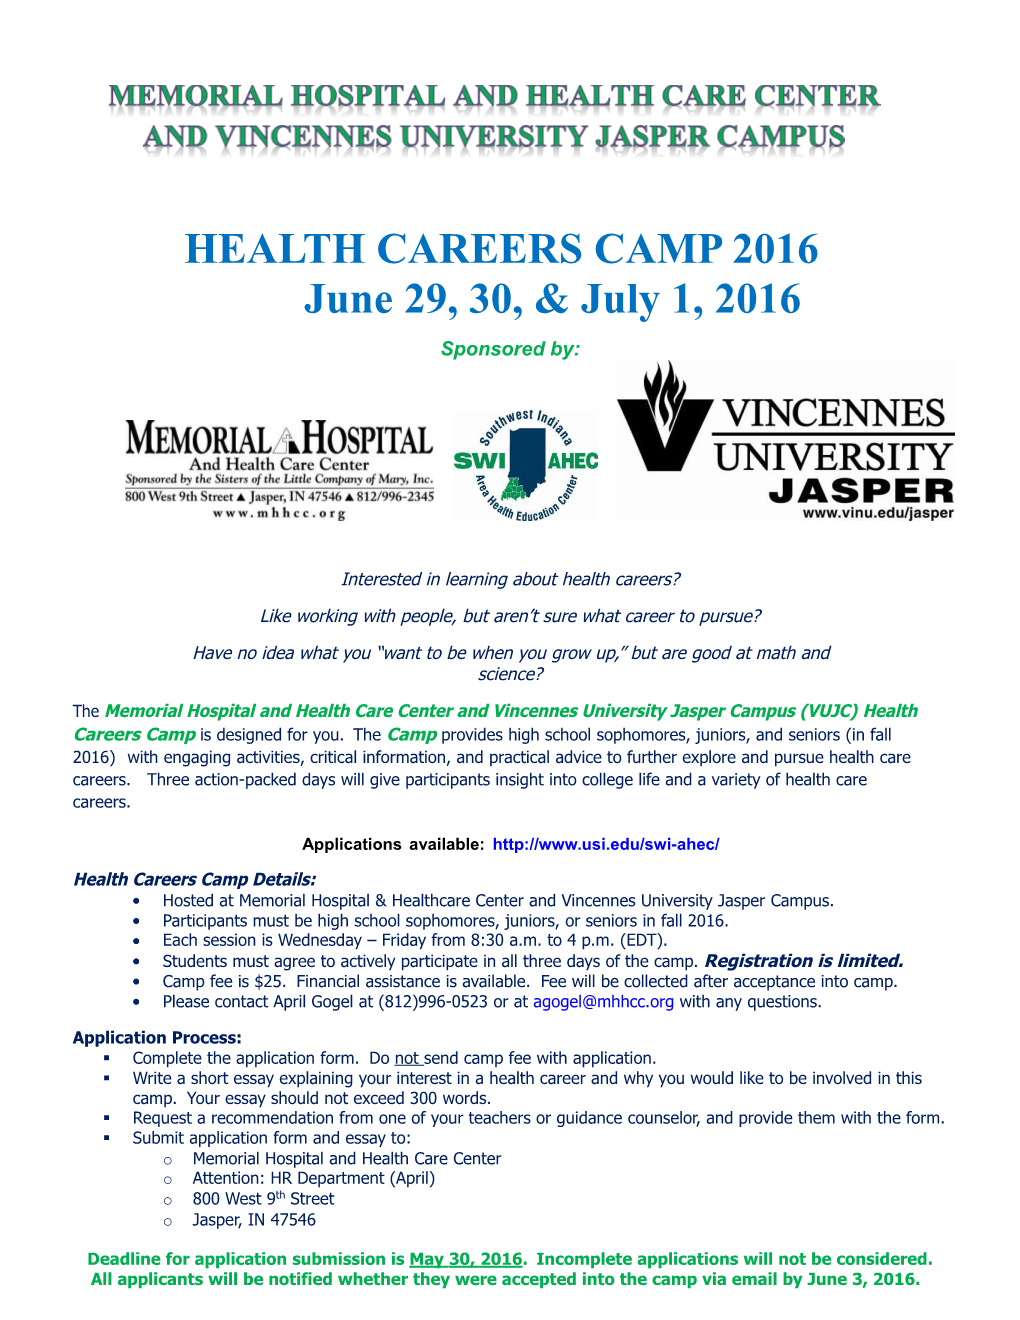 Interested in Learning About Health Careers?